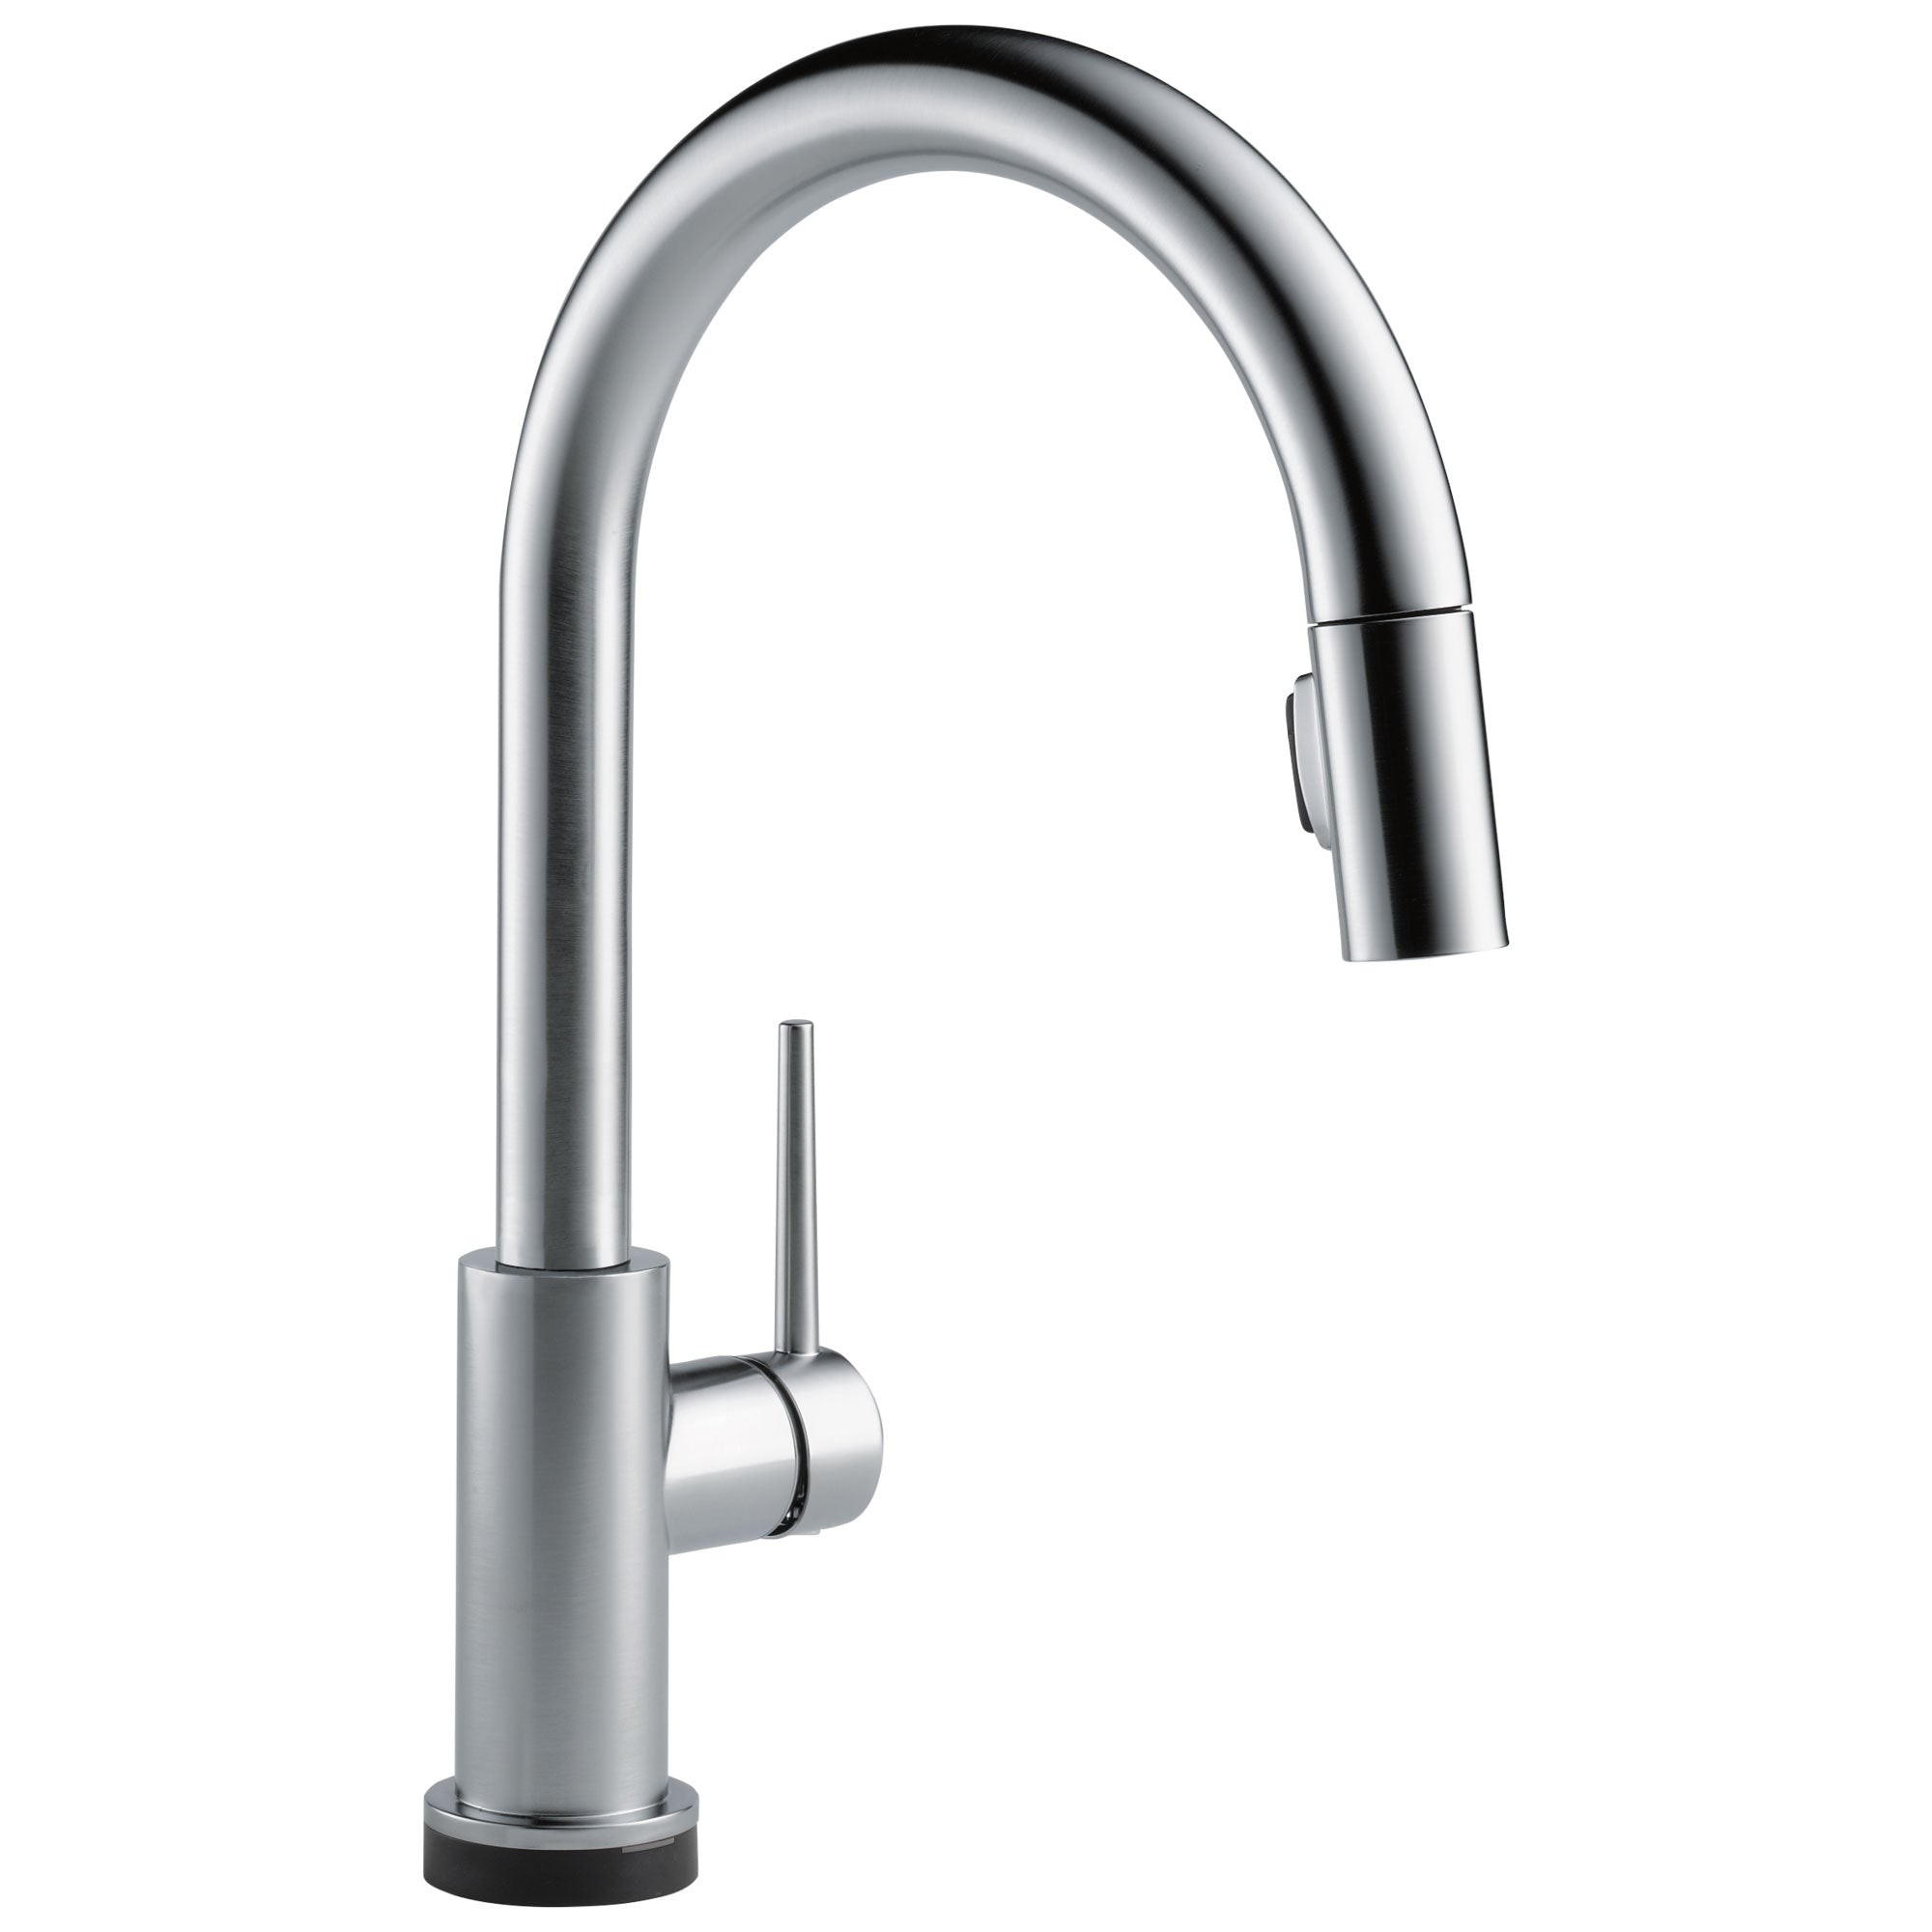 Delta Trinsic Arctic Stainless Steel Finish VoiceIQ Single-Handle Pull-Down Kitchen Faucet with Touch2O Technology D9159TVARDST